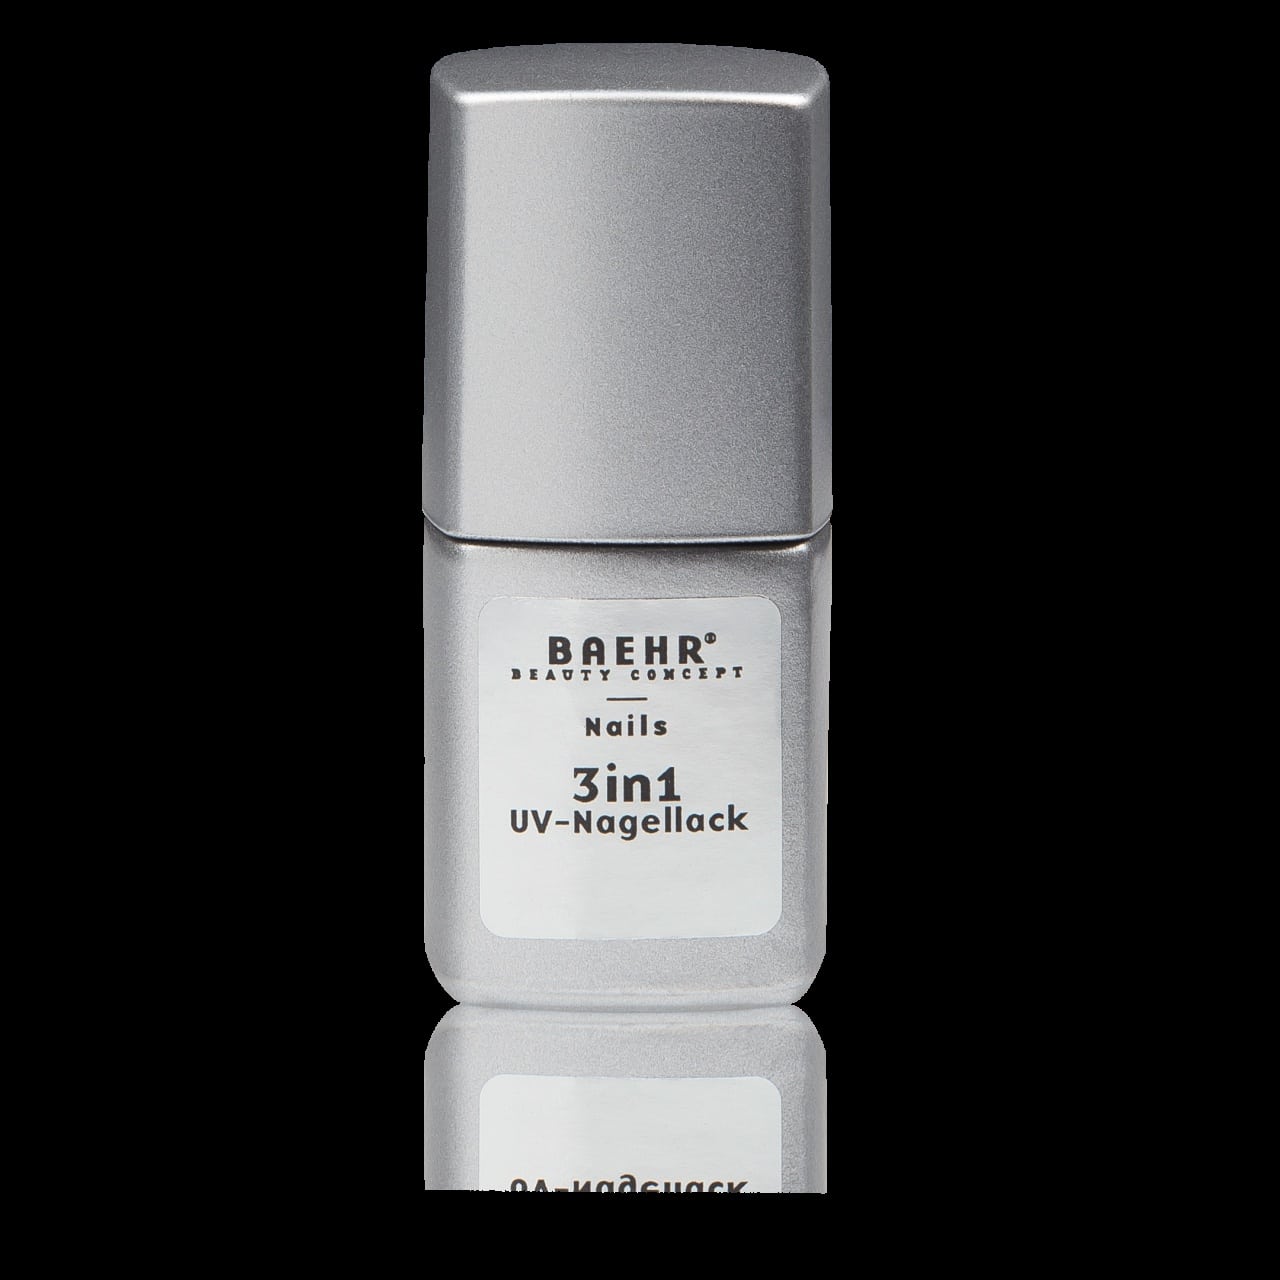 beahr-beauty-concept-3in1-uv-nagellack-coral-12-ml